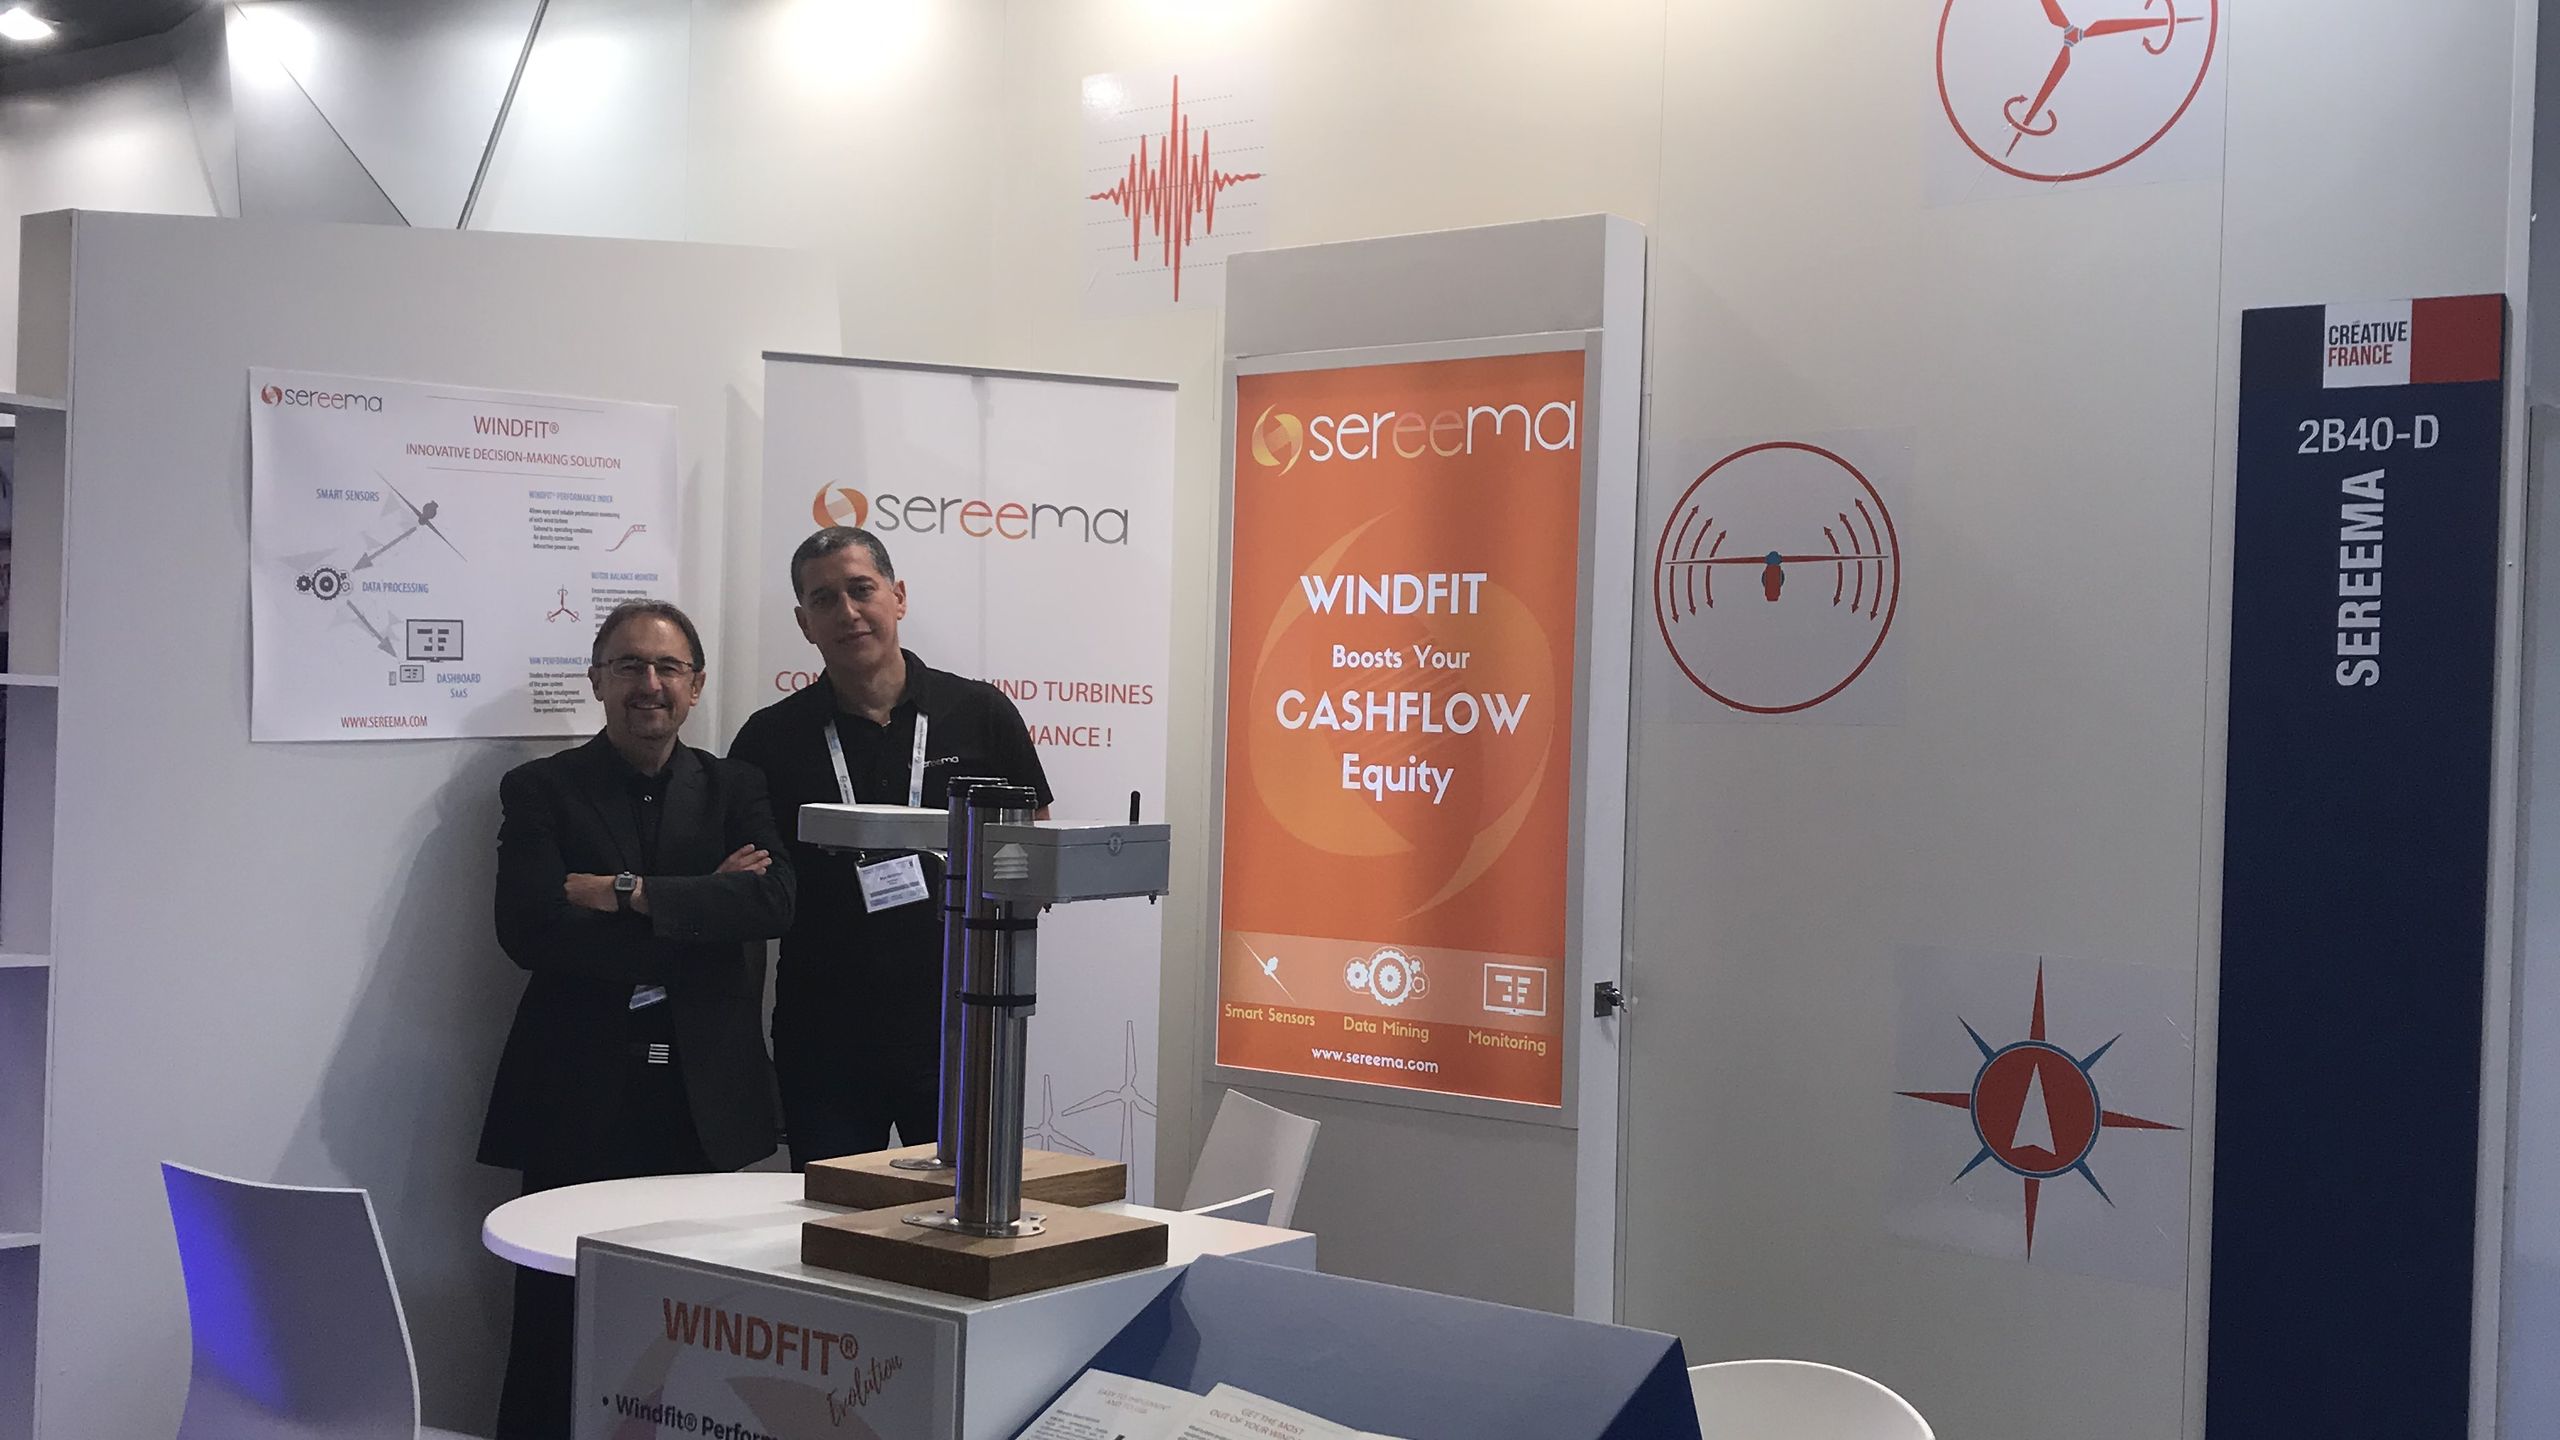 Let's talk about how to maximize your portfolio return in a new era of windpower with Sereema's team on site at #WEUOM